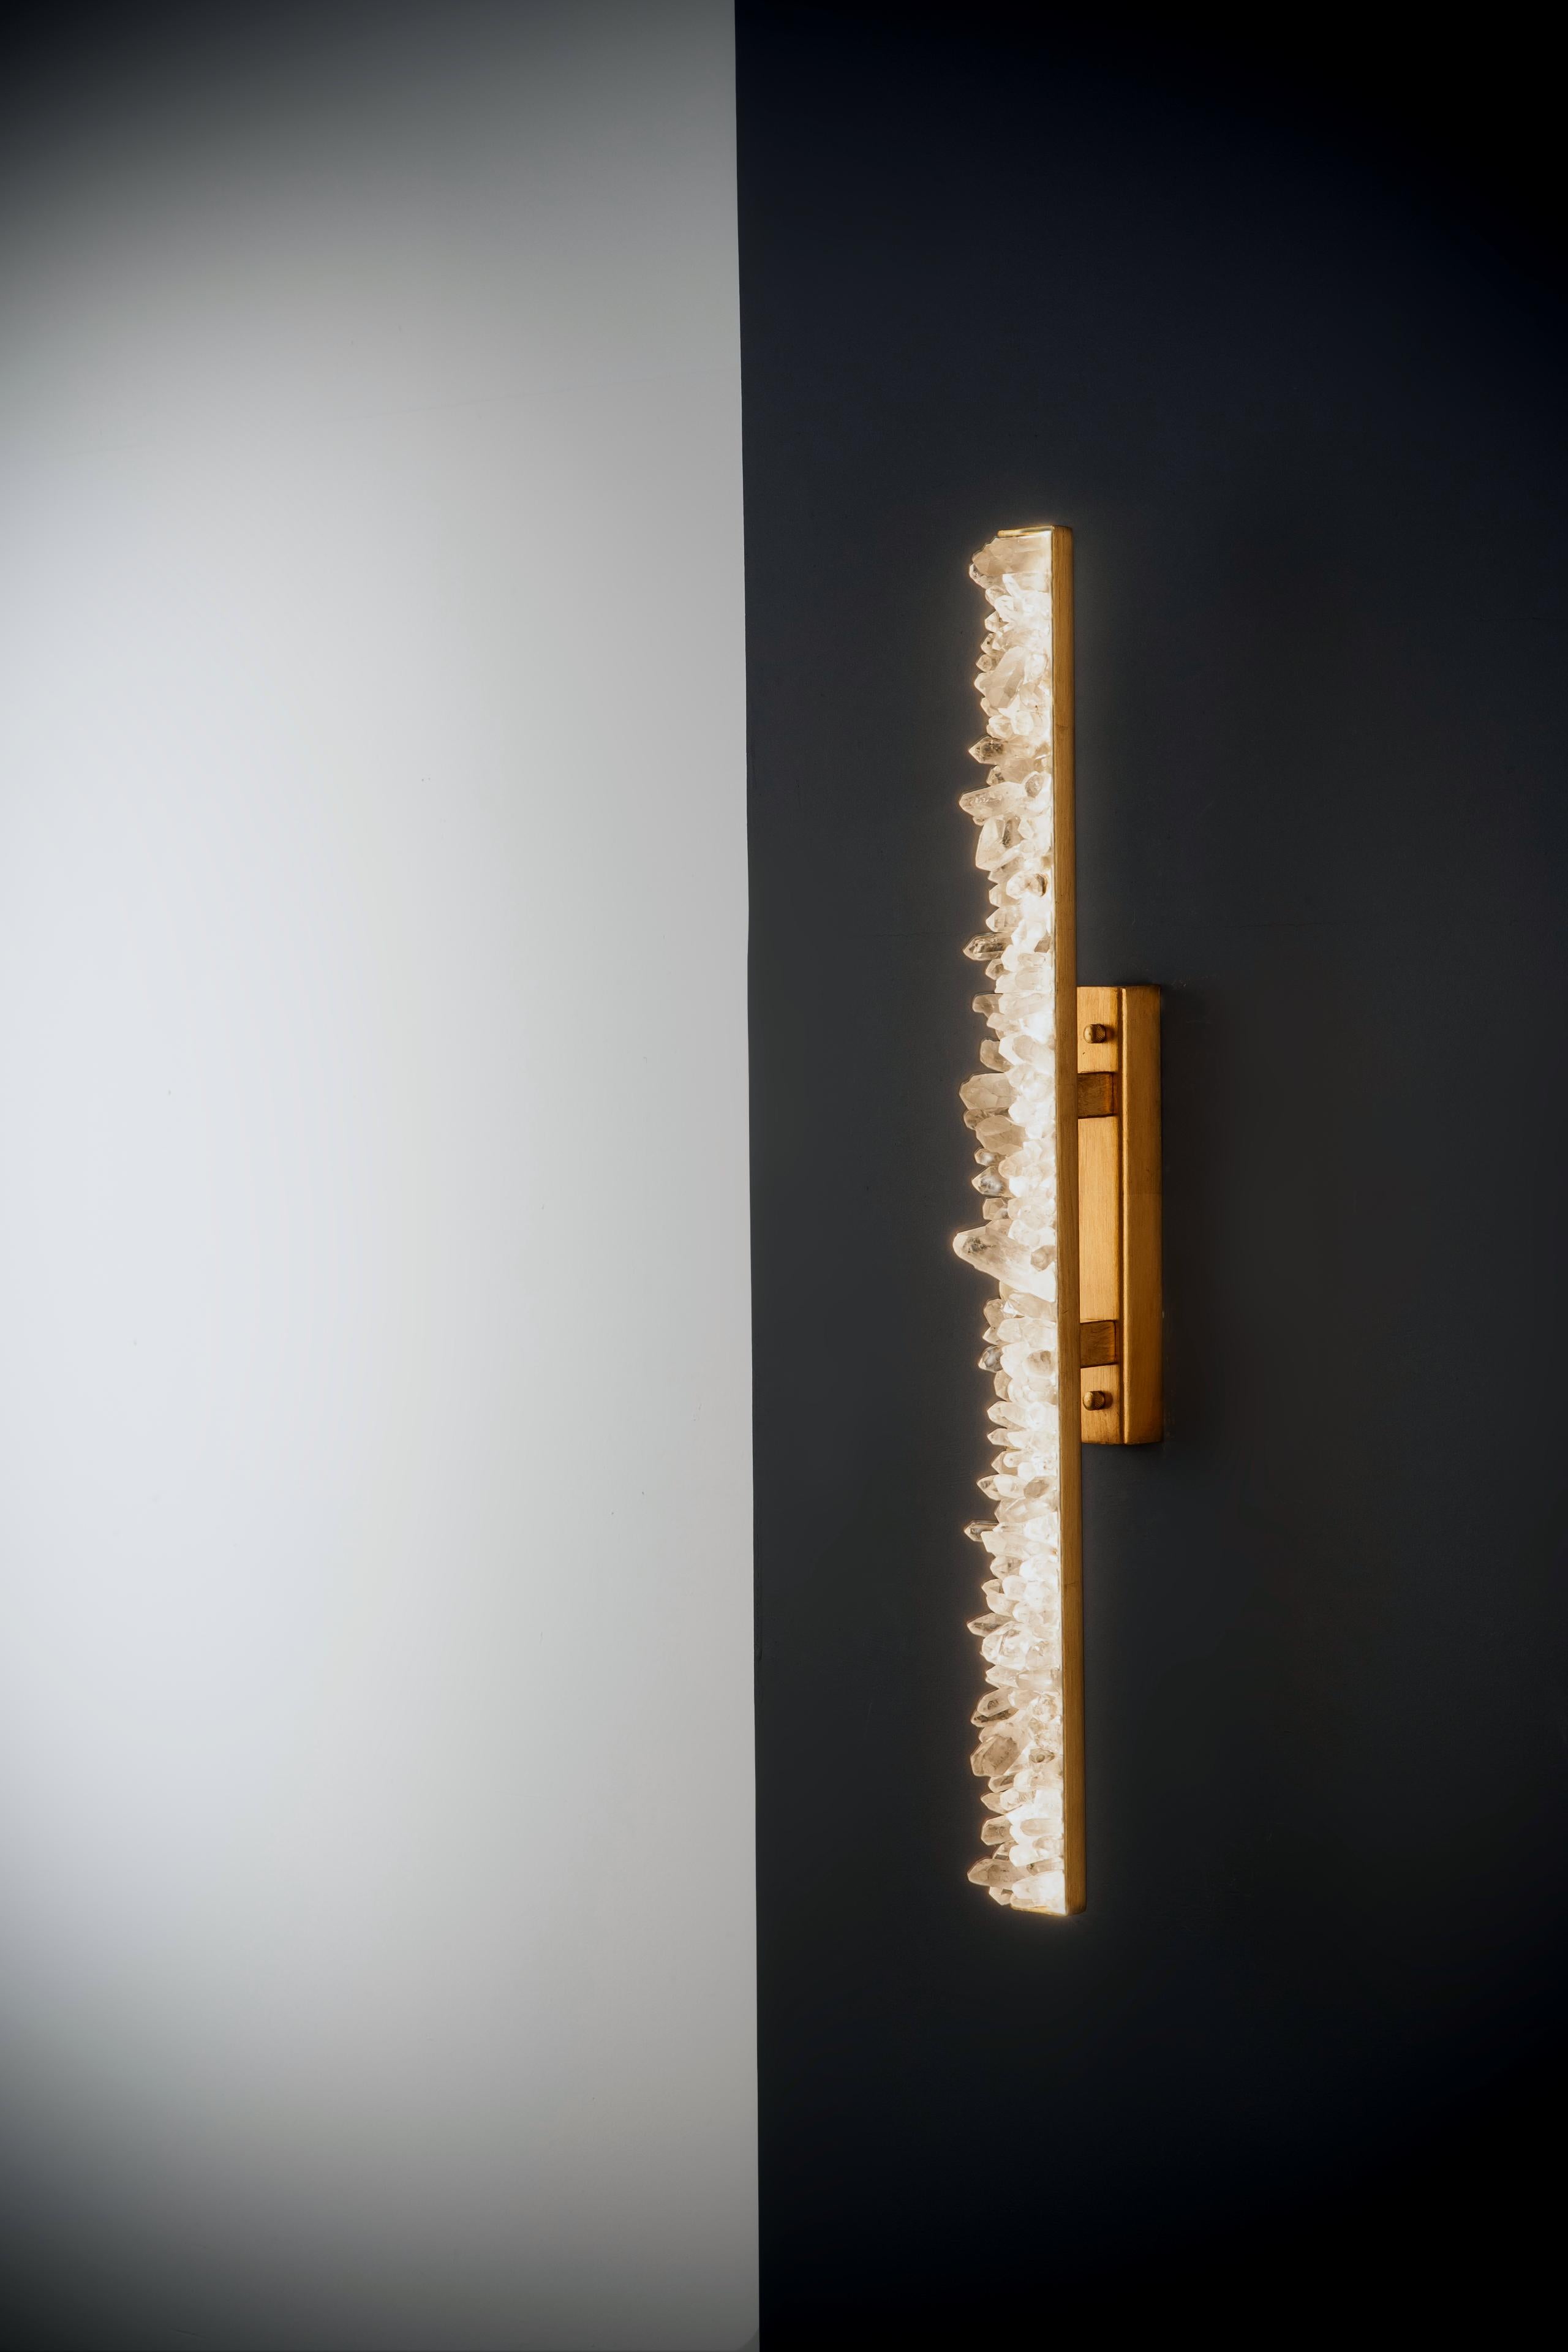 Brazilian Pair of Smoked Quartz Wall Lamp by Aver  For Sale